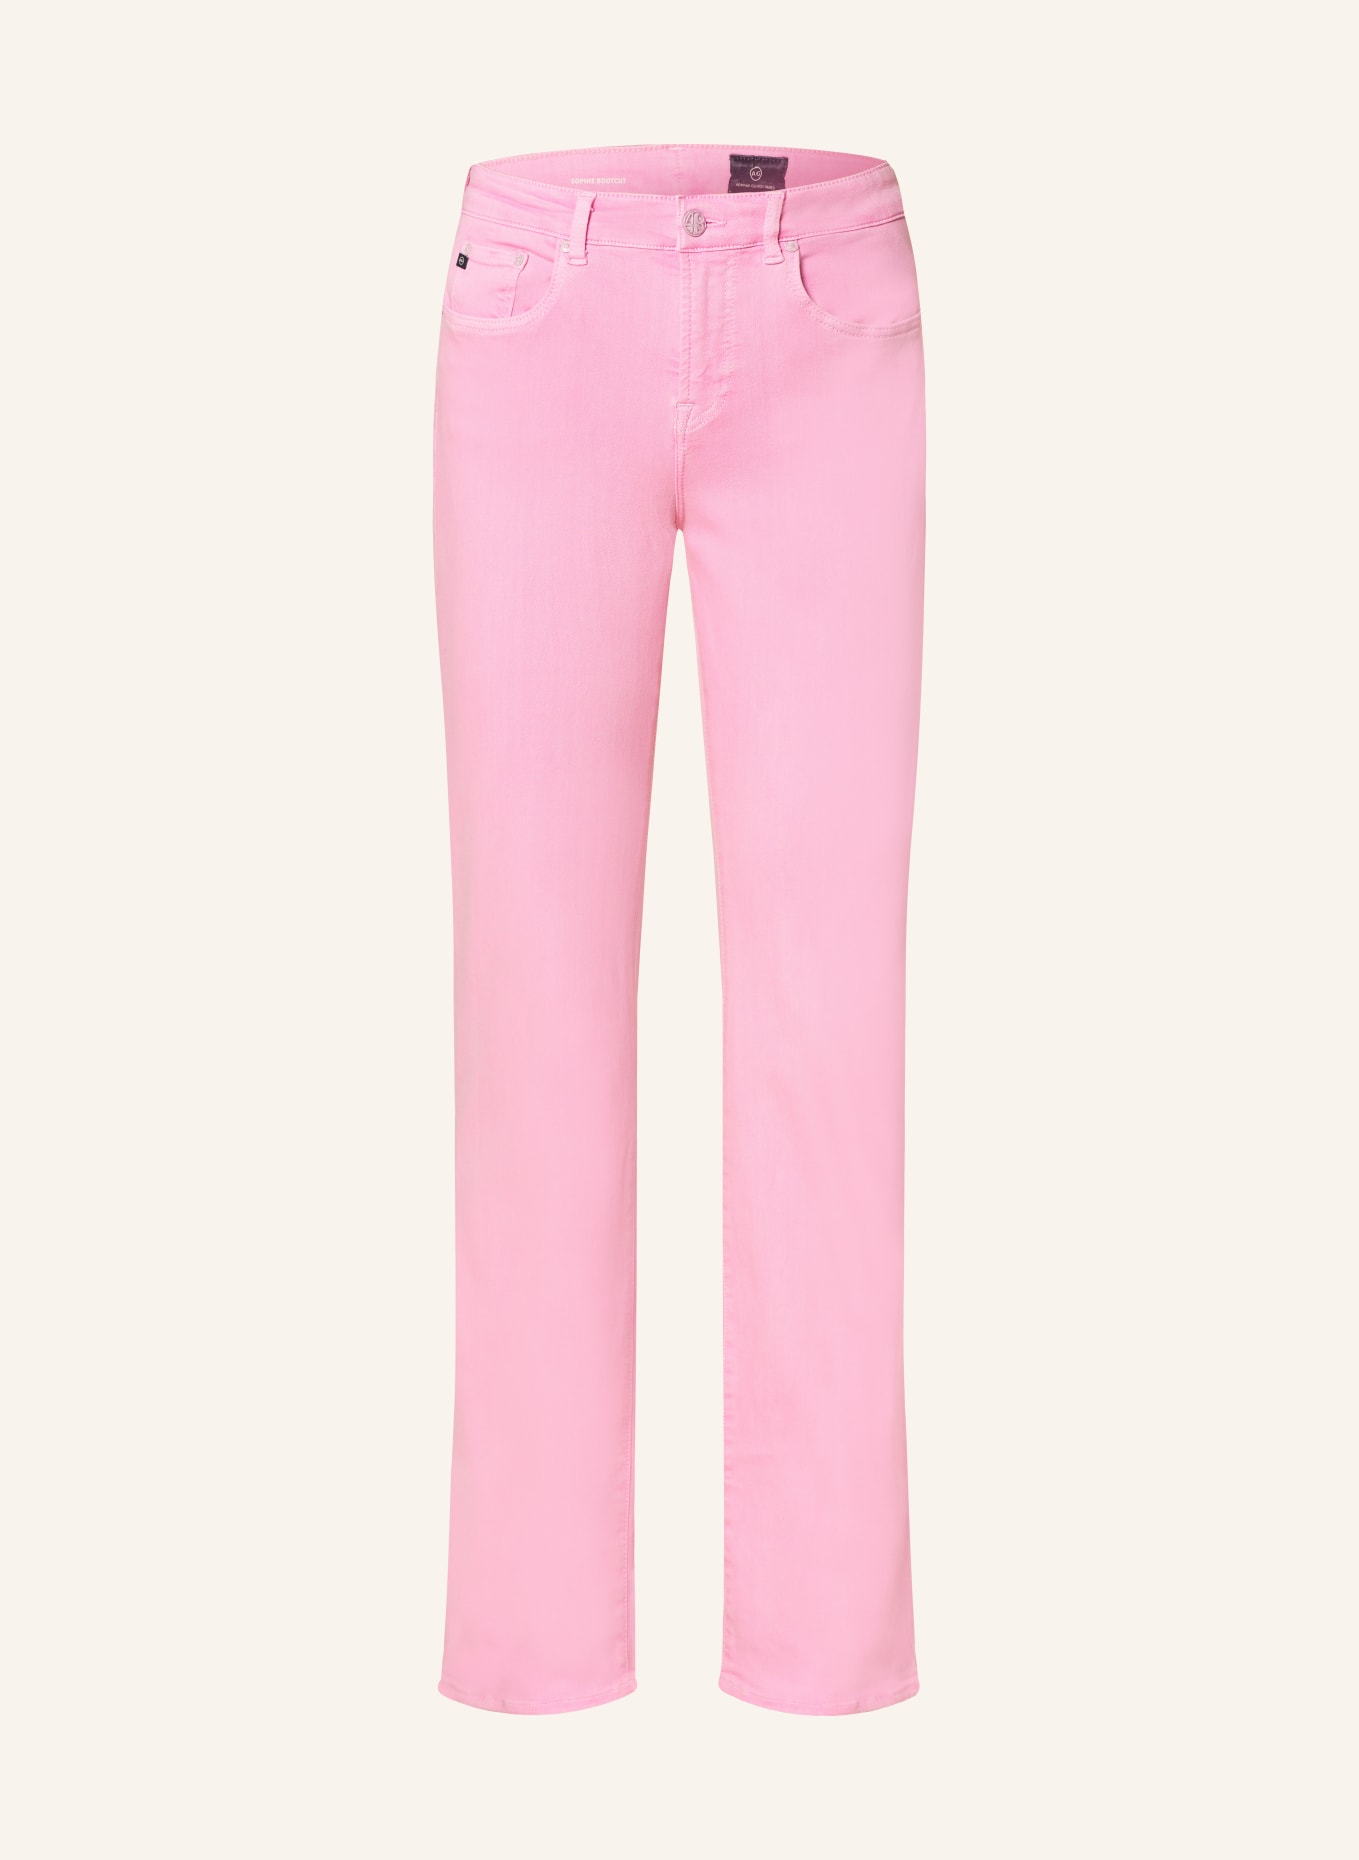 AG Jeans Bootcut Jeans SOPHIE, Farbe: ROSA (Bild 1)